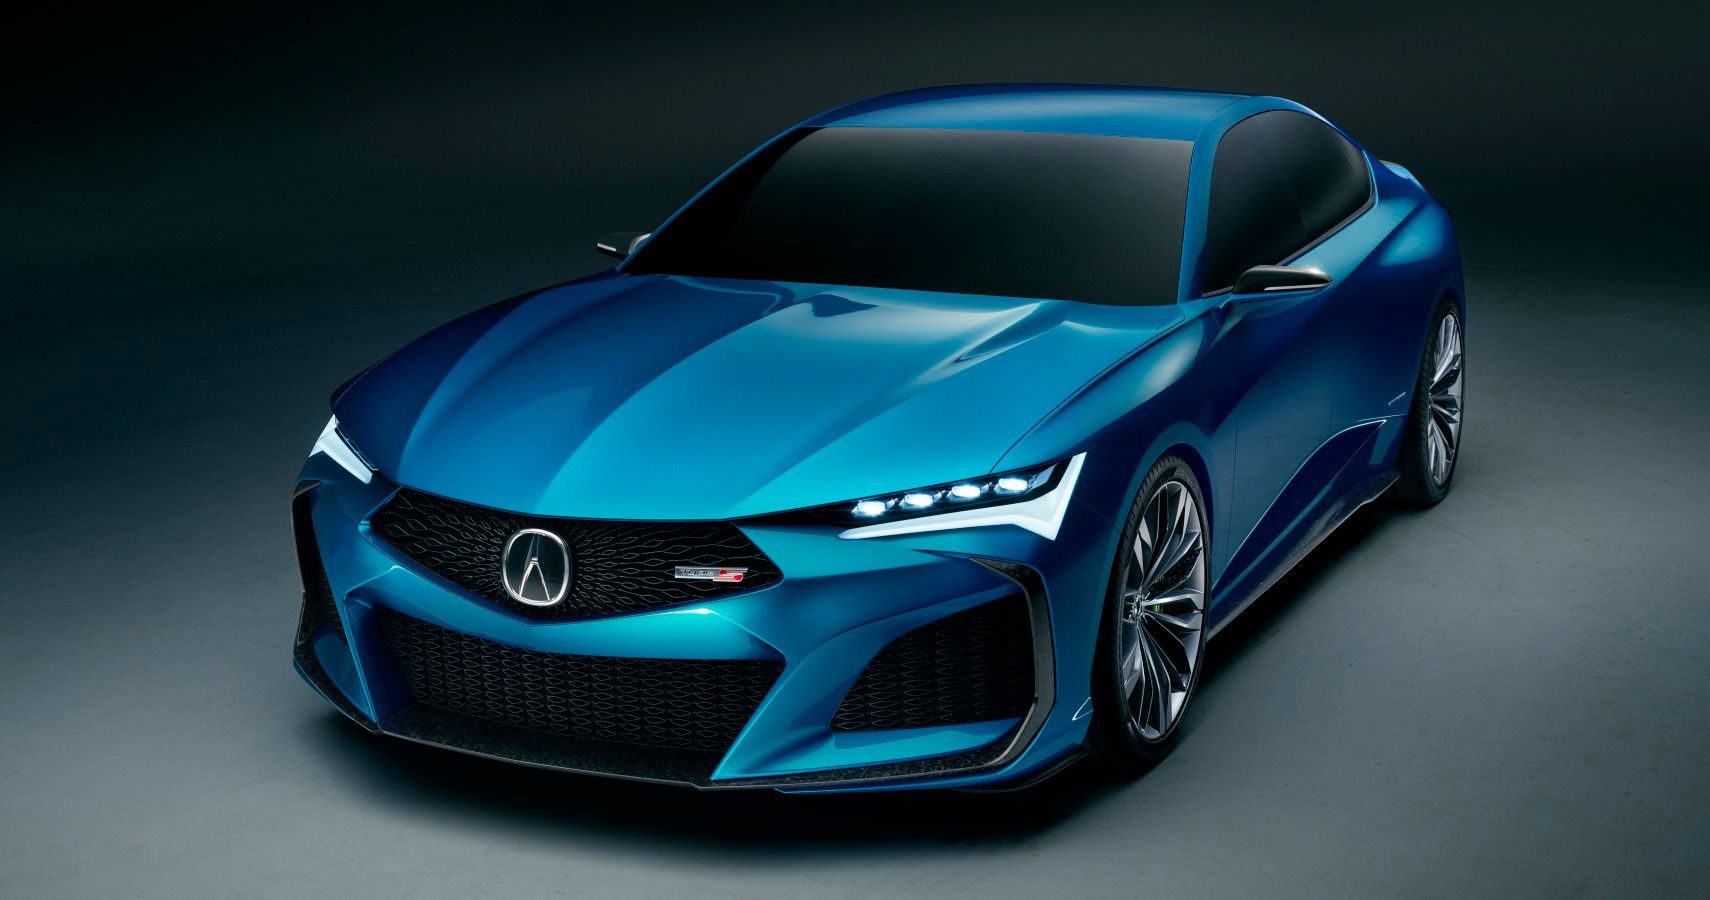 Acura Debuts Type S Concept As Next-Gen TLX | HotCars